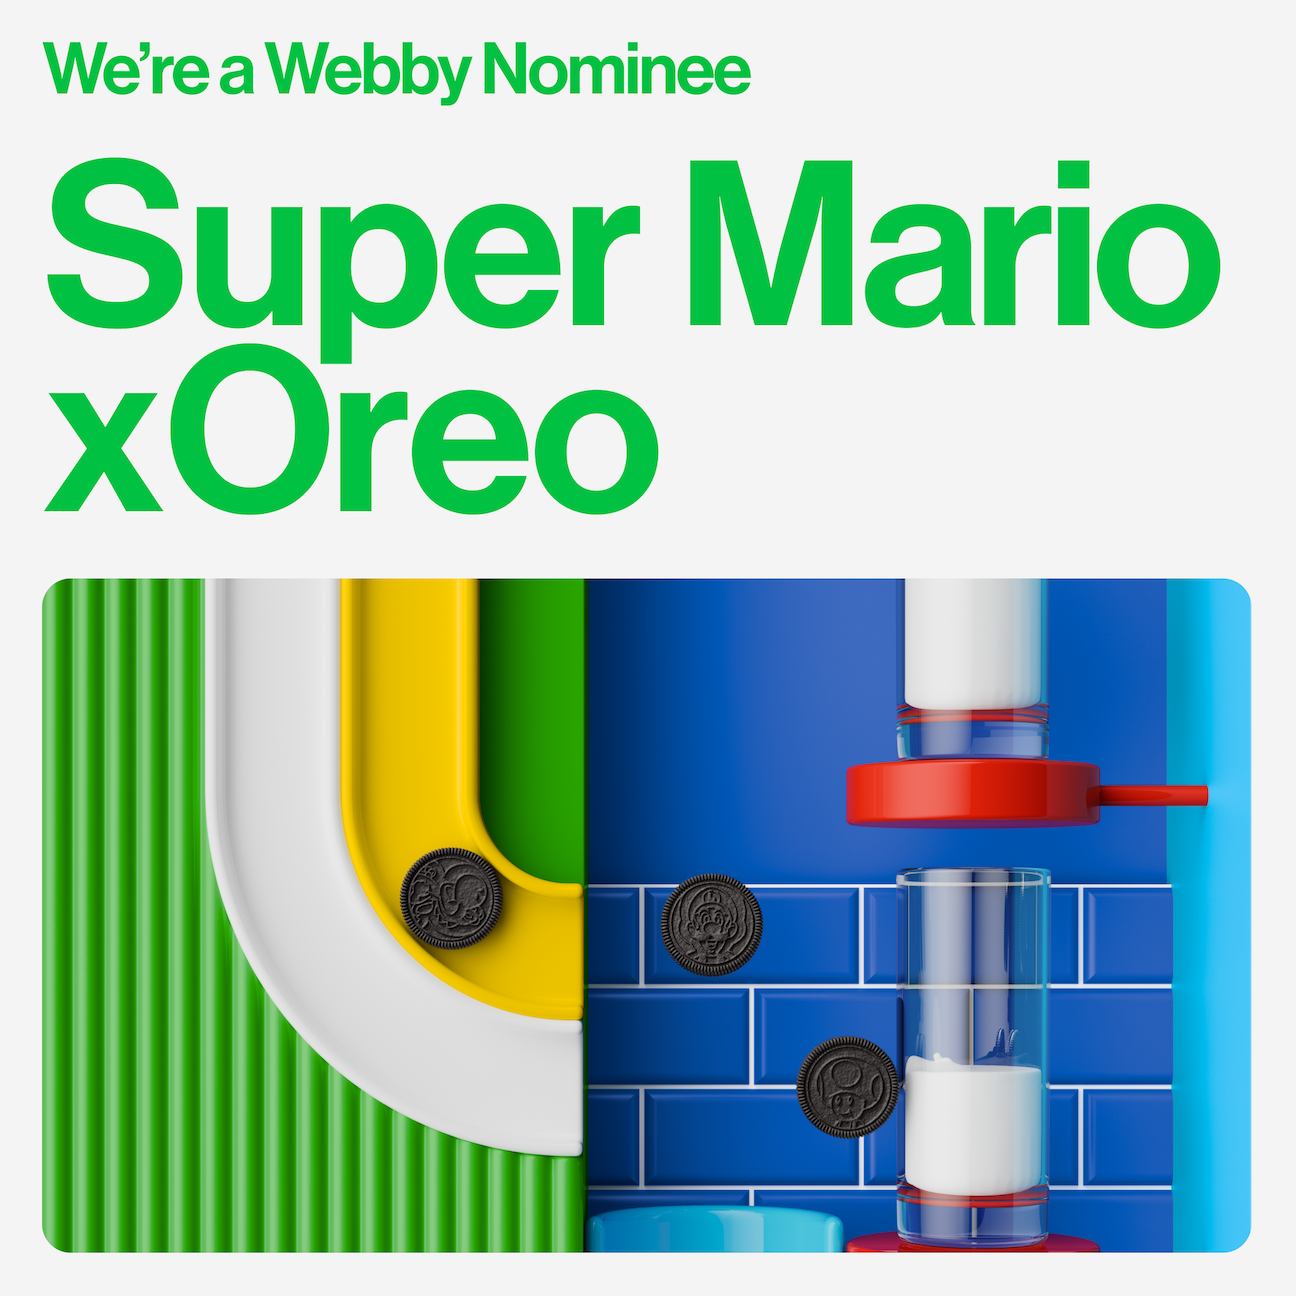 We're Nominated for Webbys!